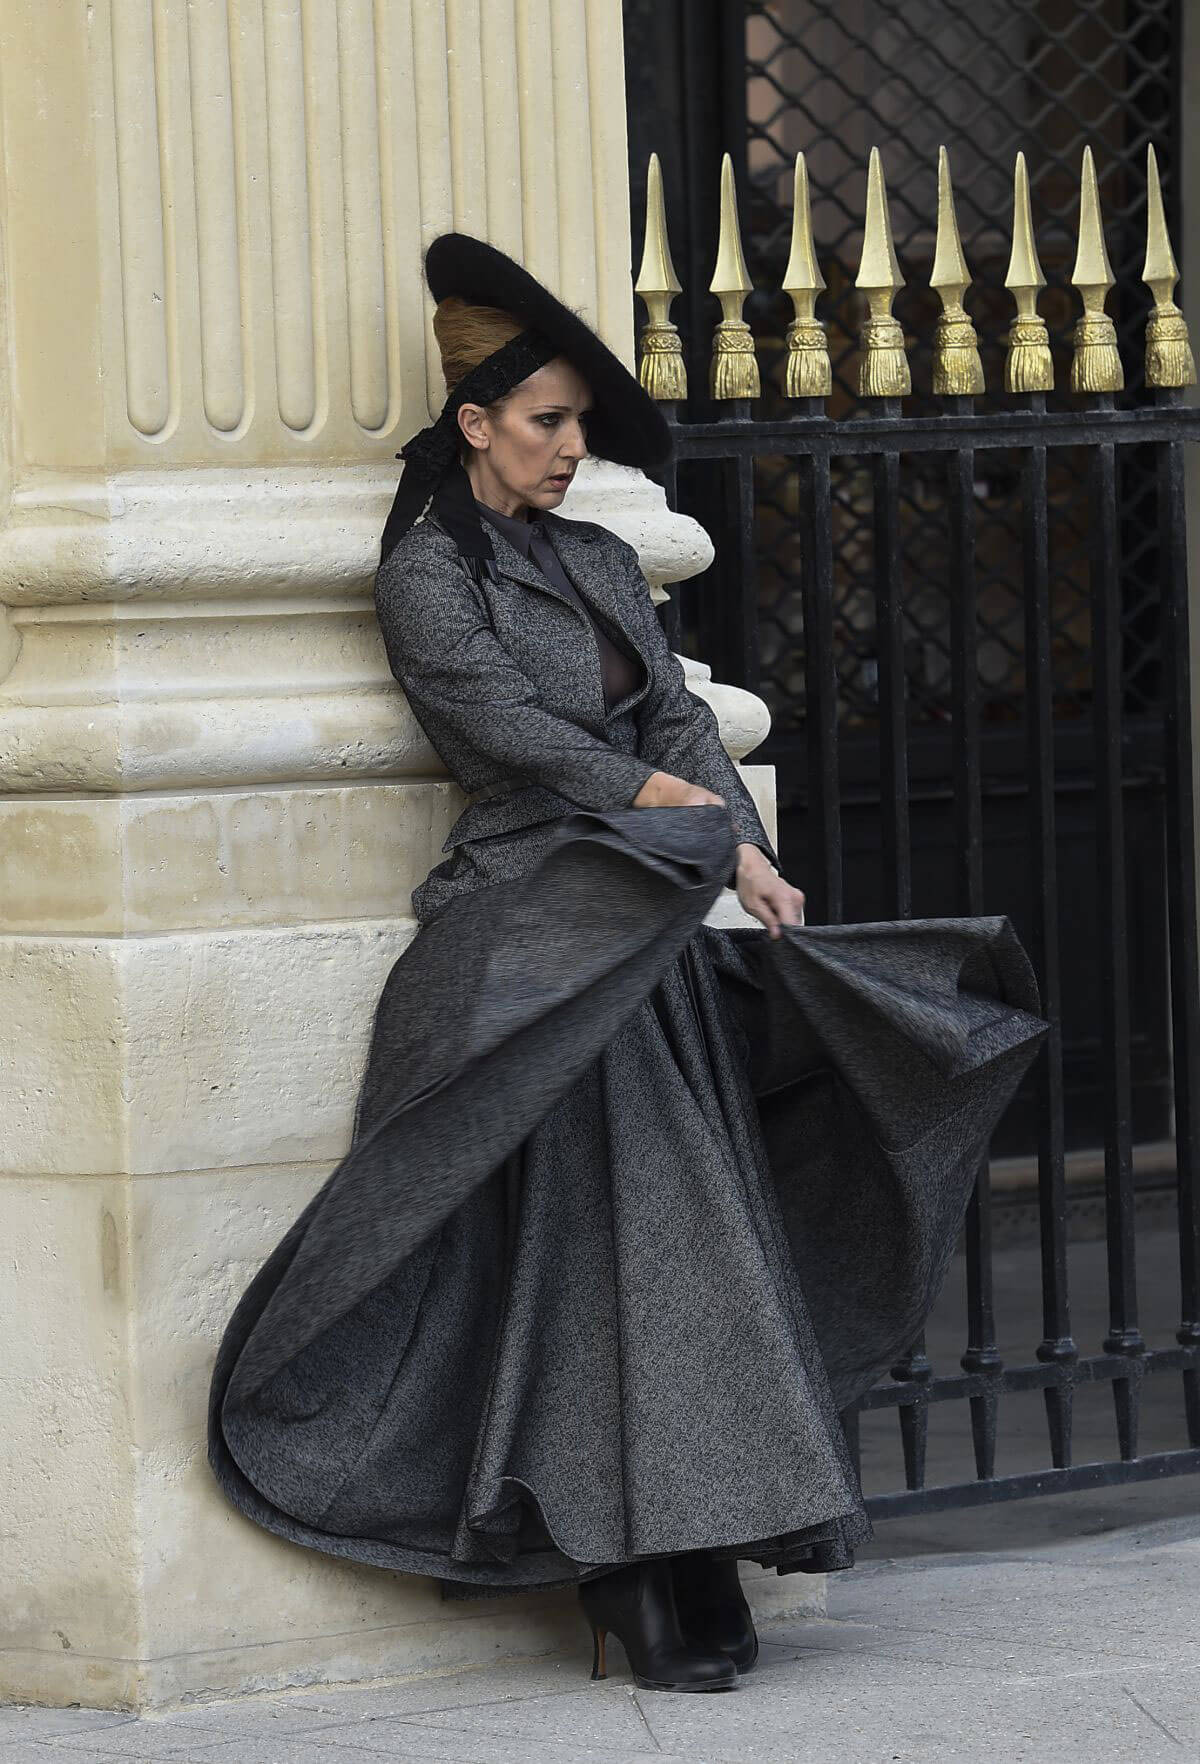 Celine Dion Stills on the Set of a Photoshoot at Palais Royal in Paris